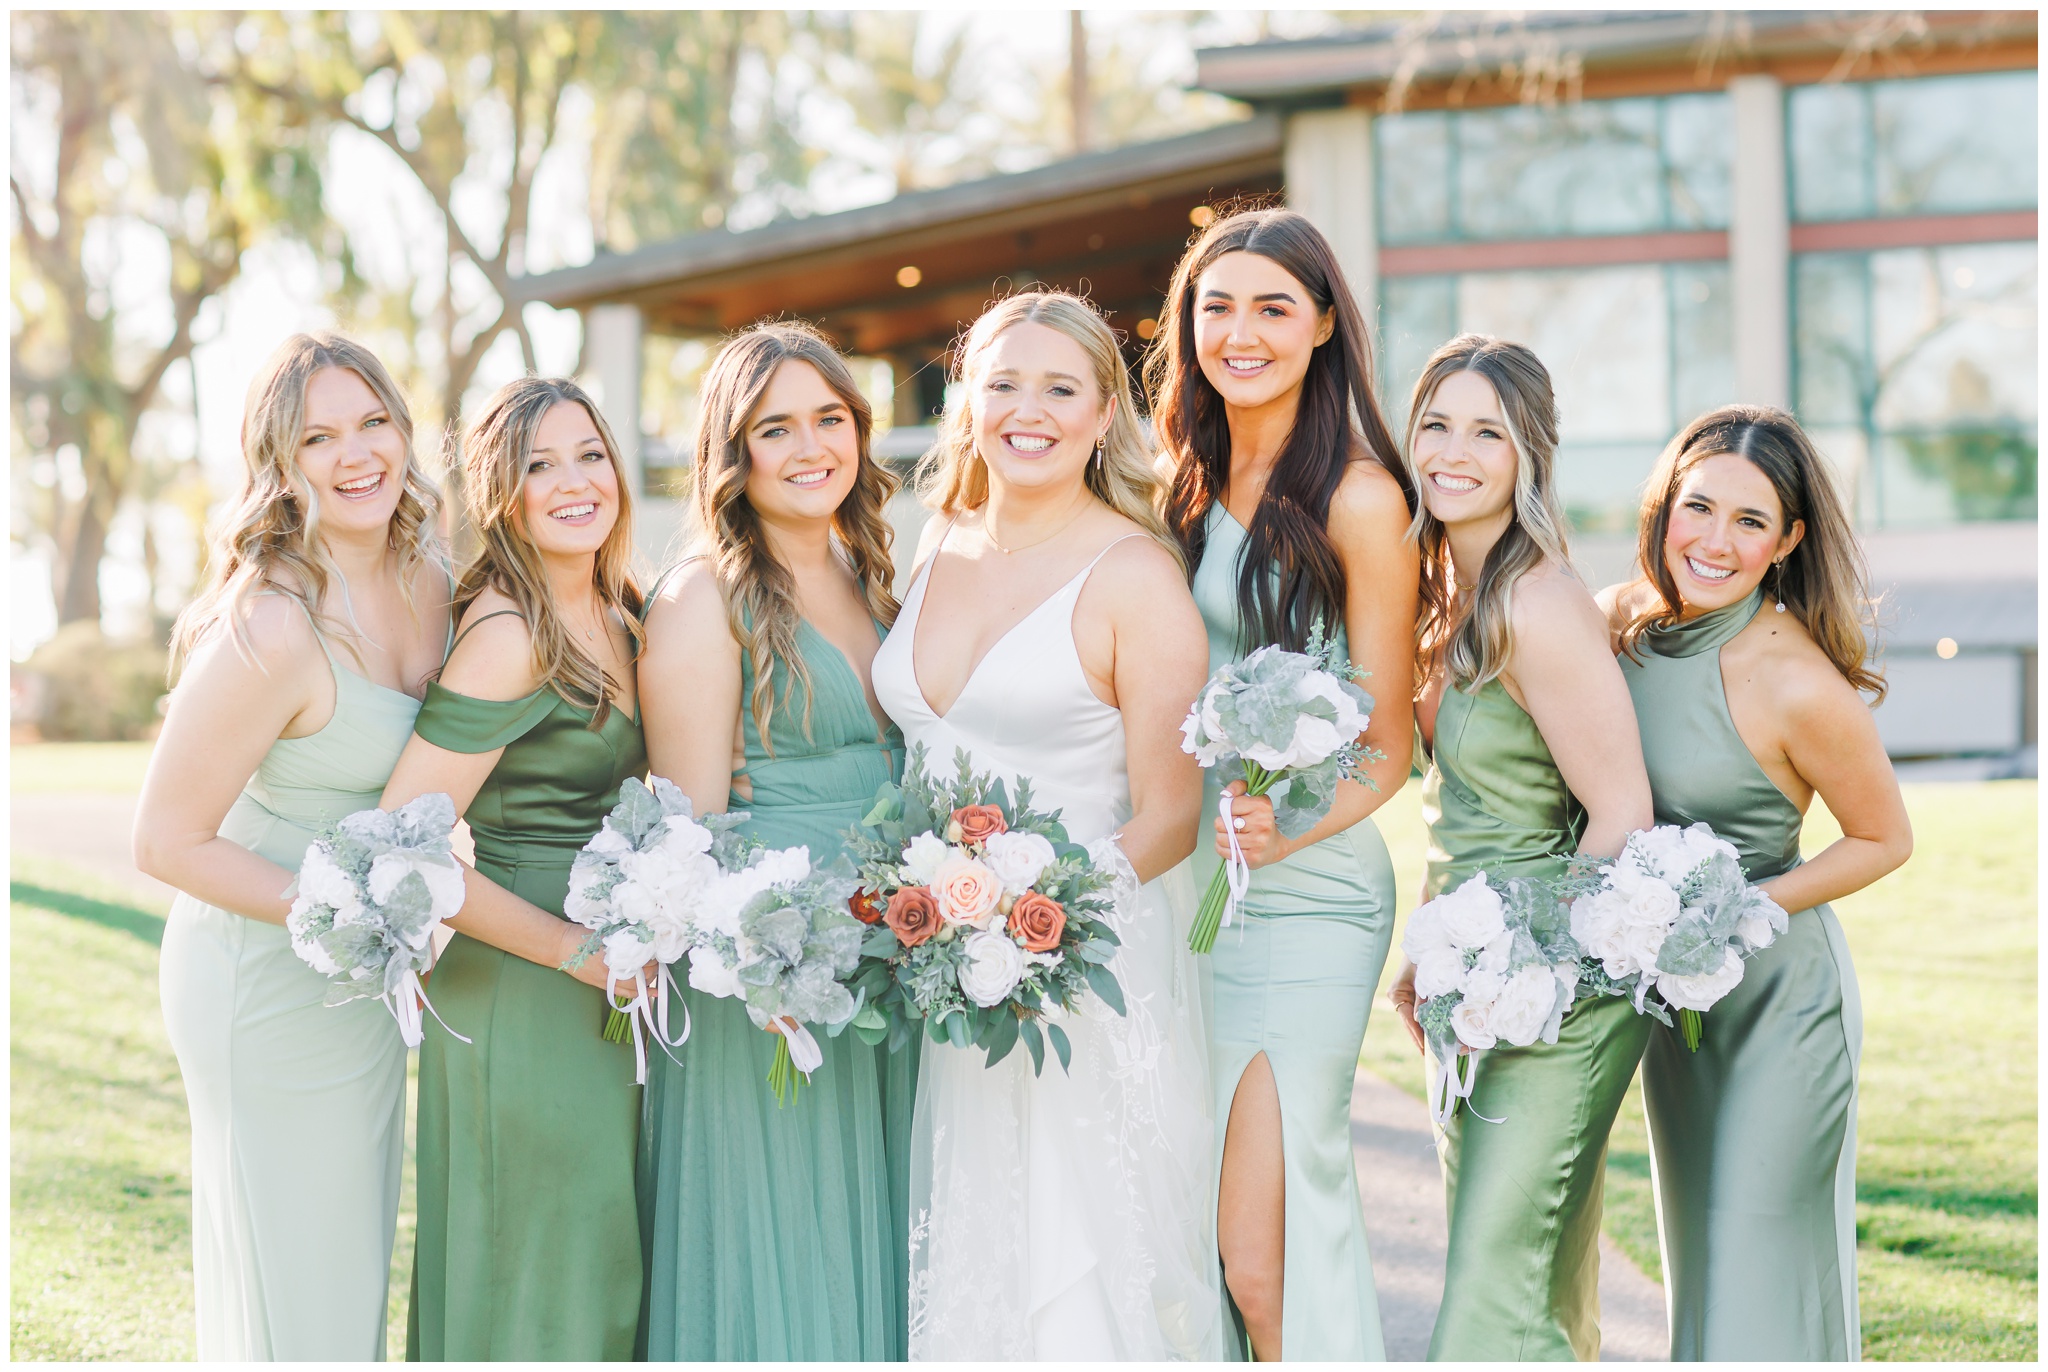 Bridesmaids in different shades of green dresses